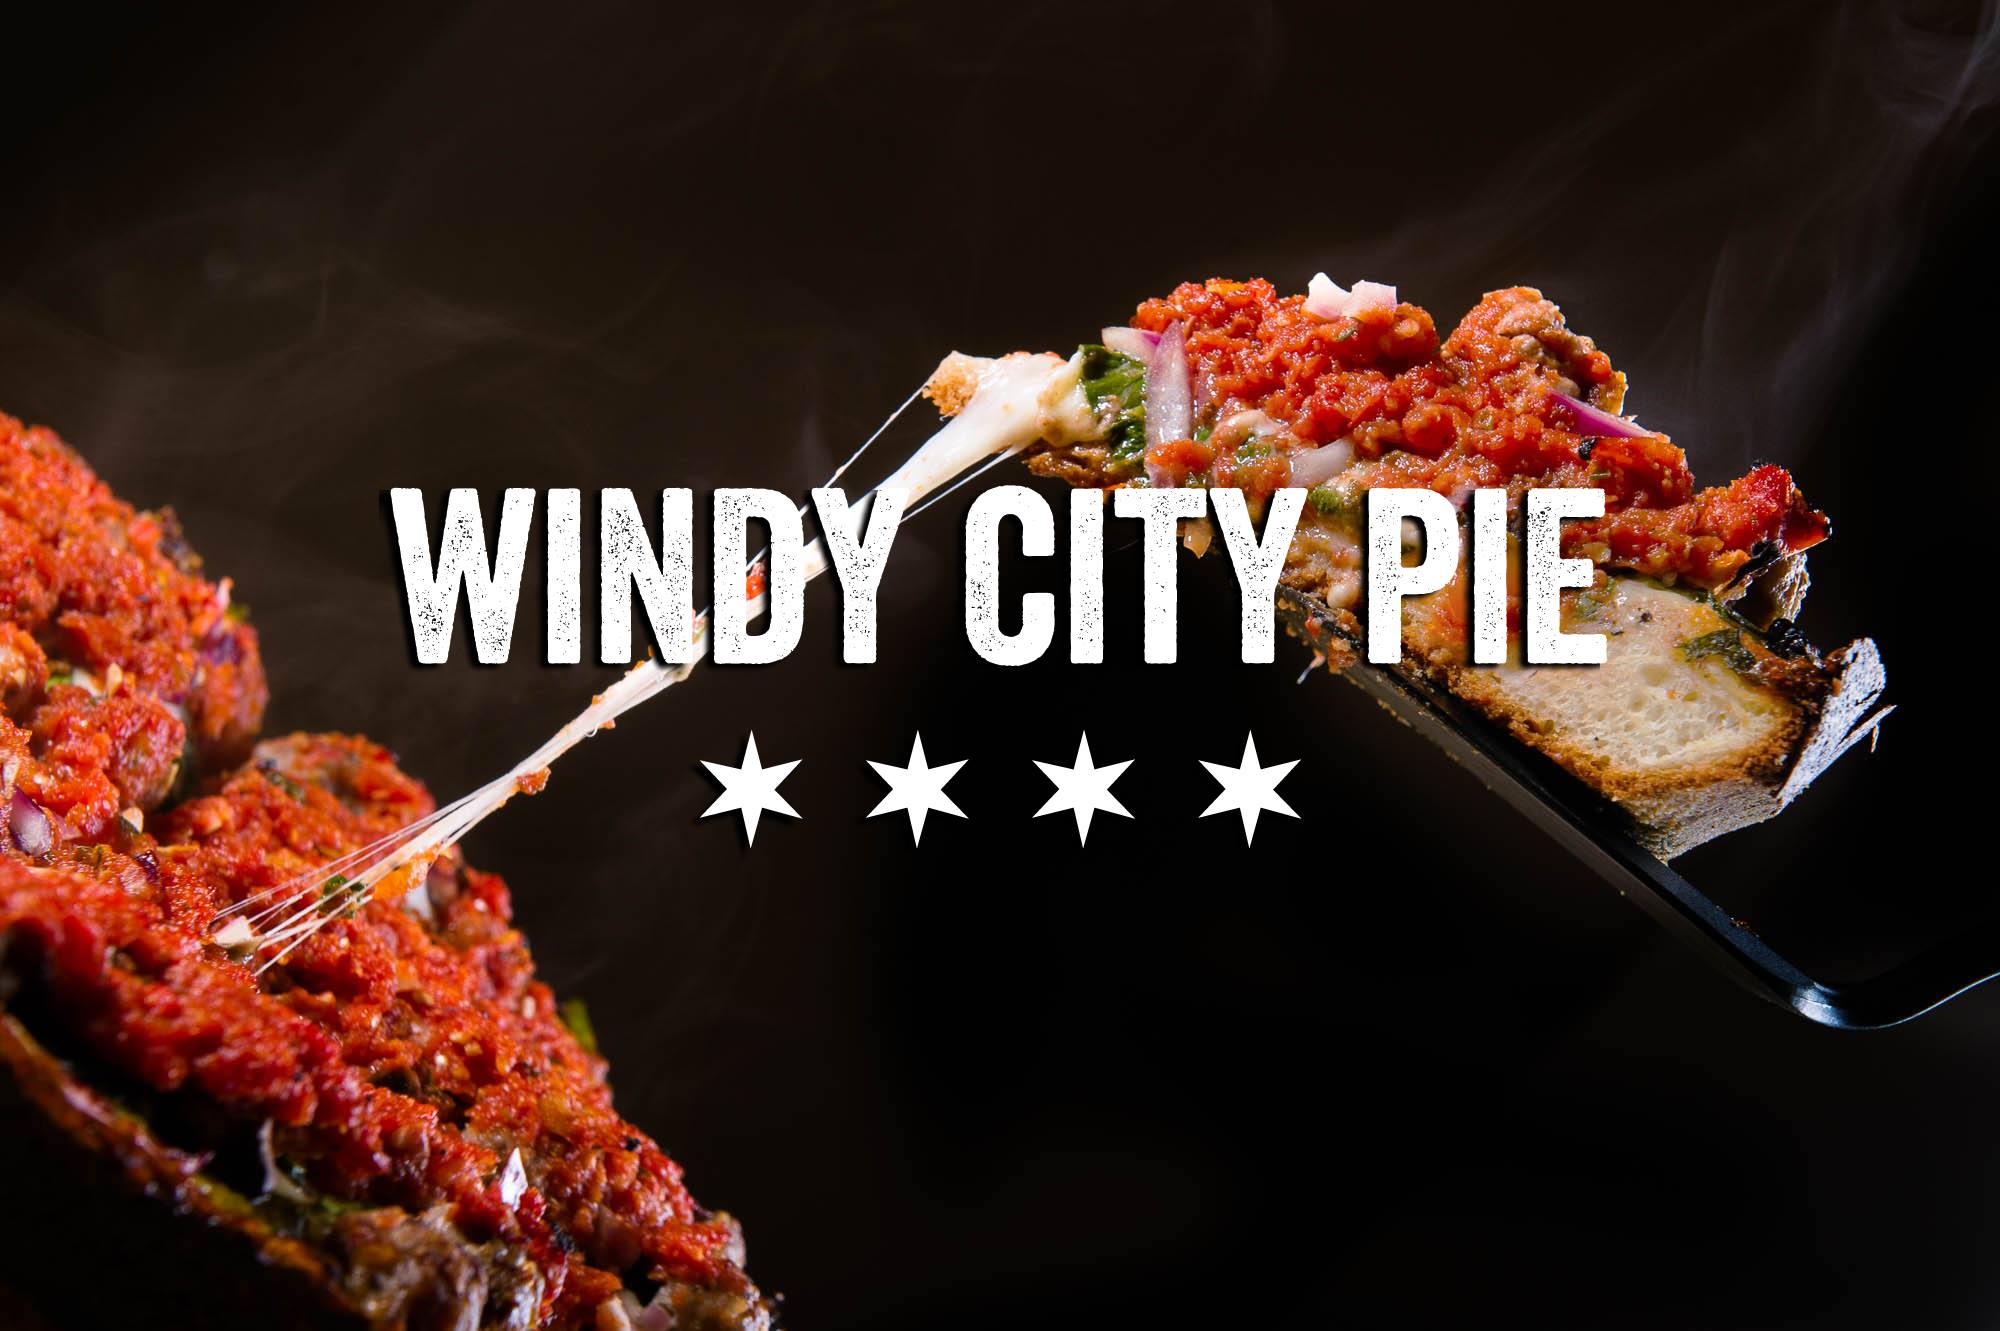 Windy City Pie pizza in seattle, Best Pizza in Seattle According to Local Reviews